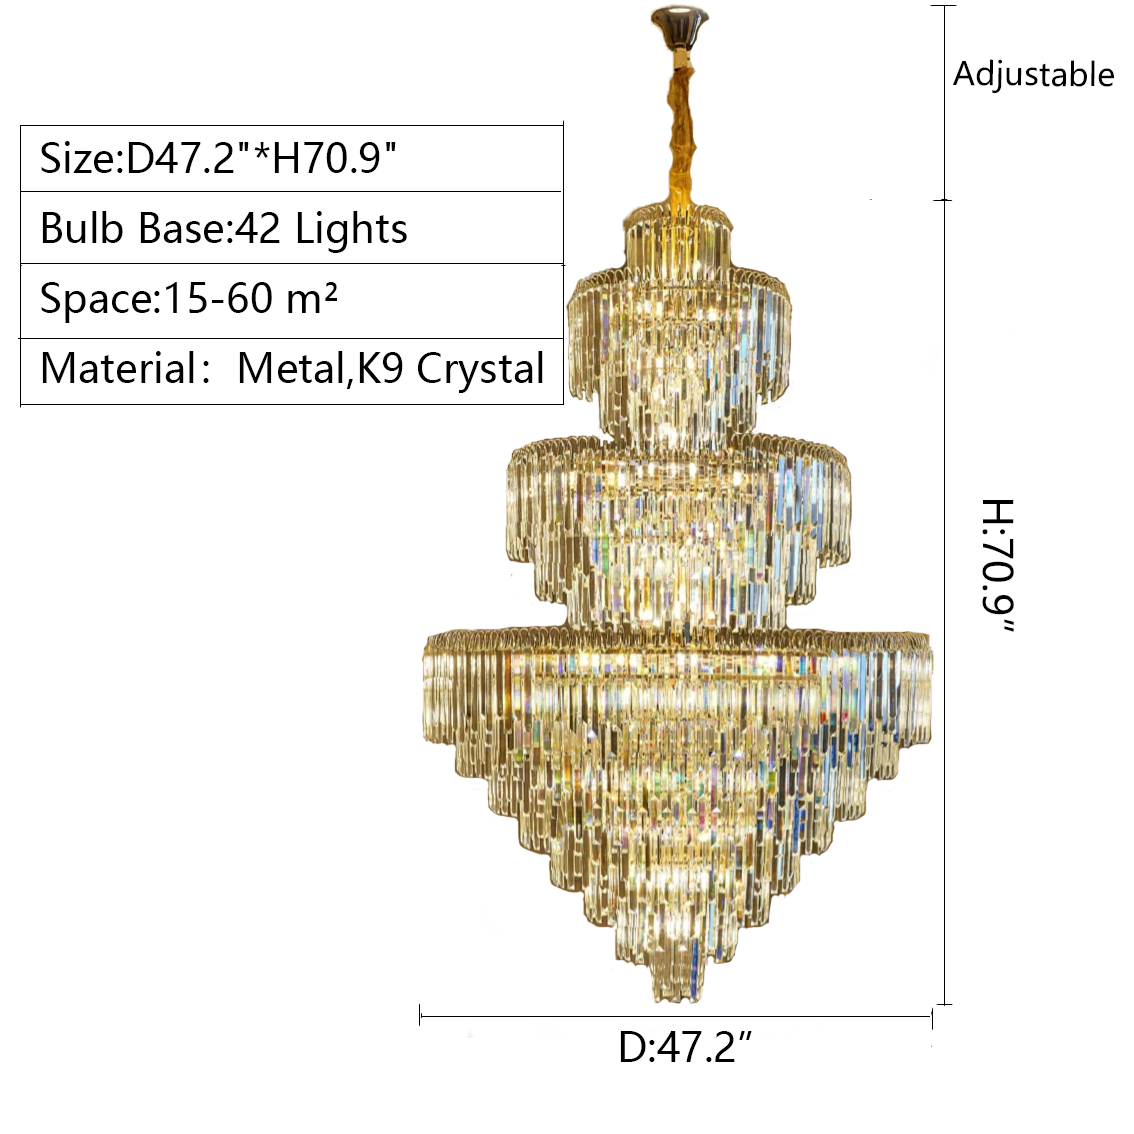 3 Layers Extra Large Living Room Chandelier Luxury Foyer Entryway Crystal Light Fixture Chandeliers Kevinstudiolives D47.2"*H70.9"/ 42 Lights Warm Light 